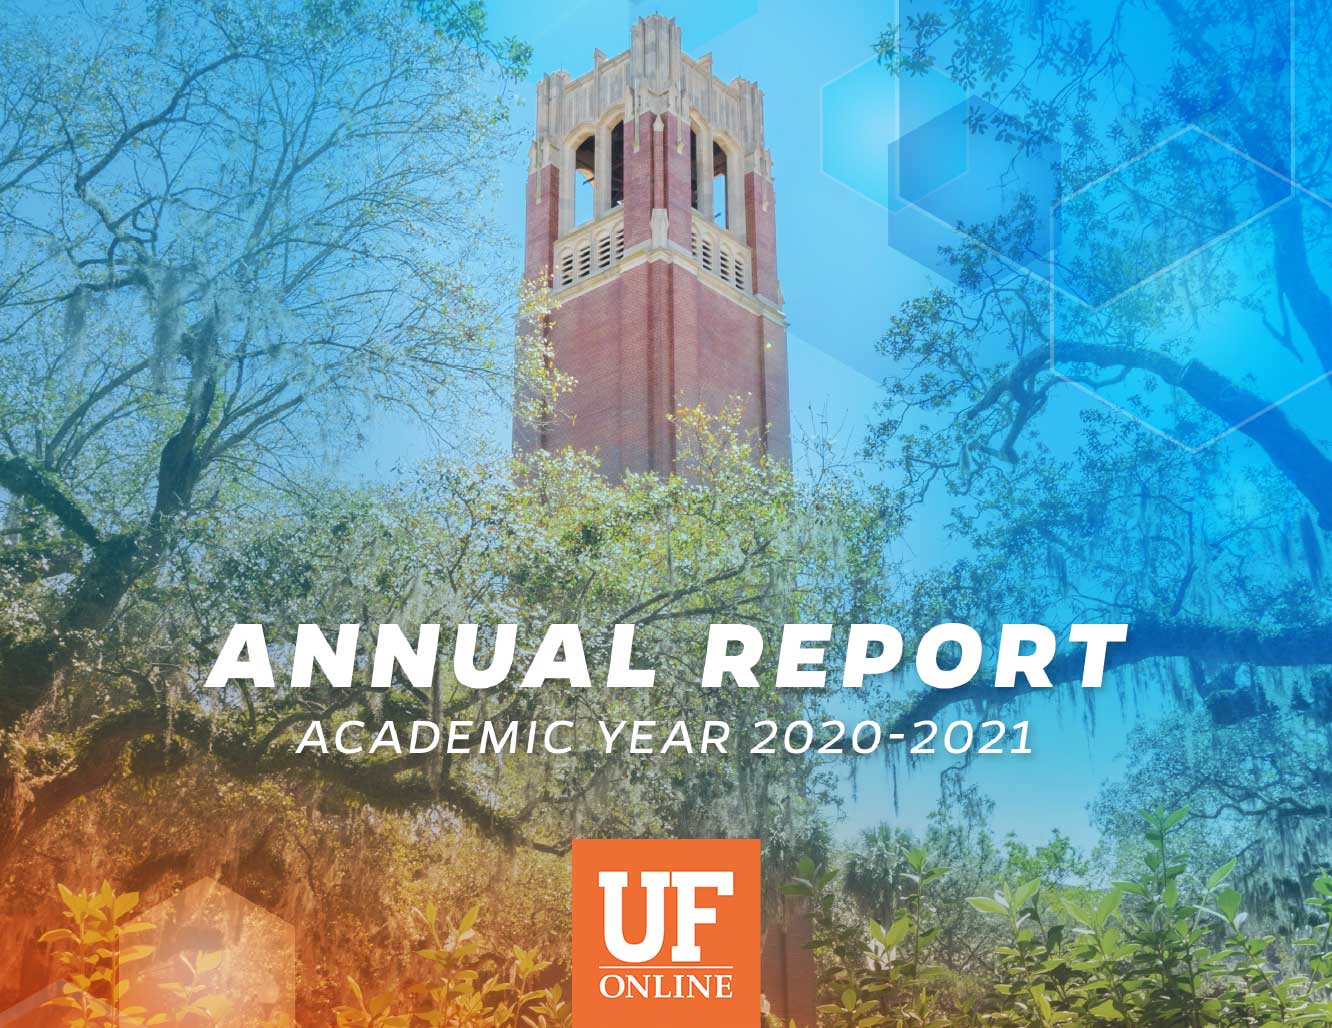 UF Online Cover of the UFO 2020-2021 Annual Report